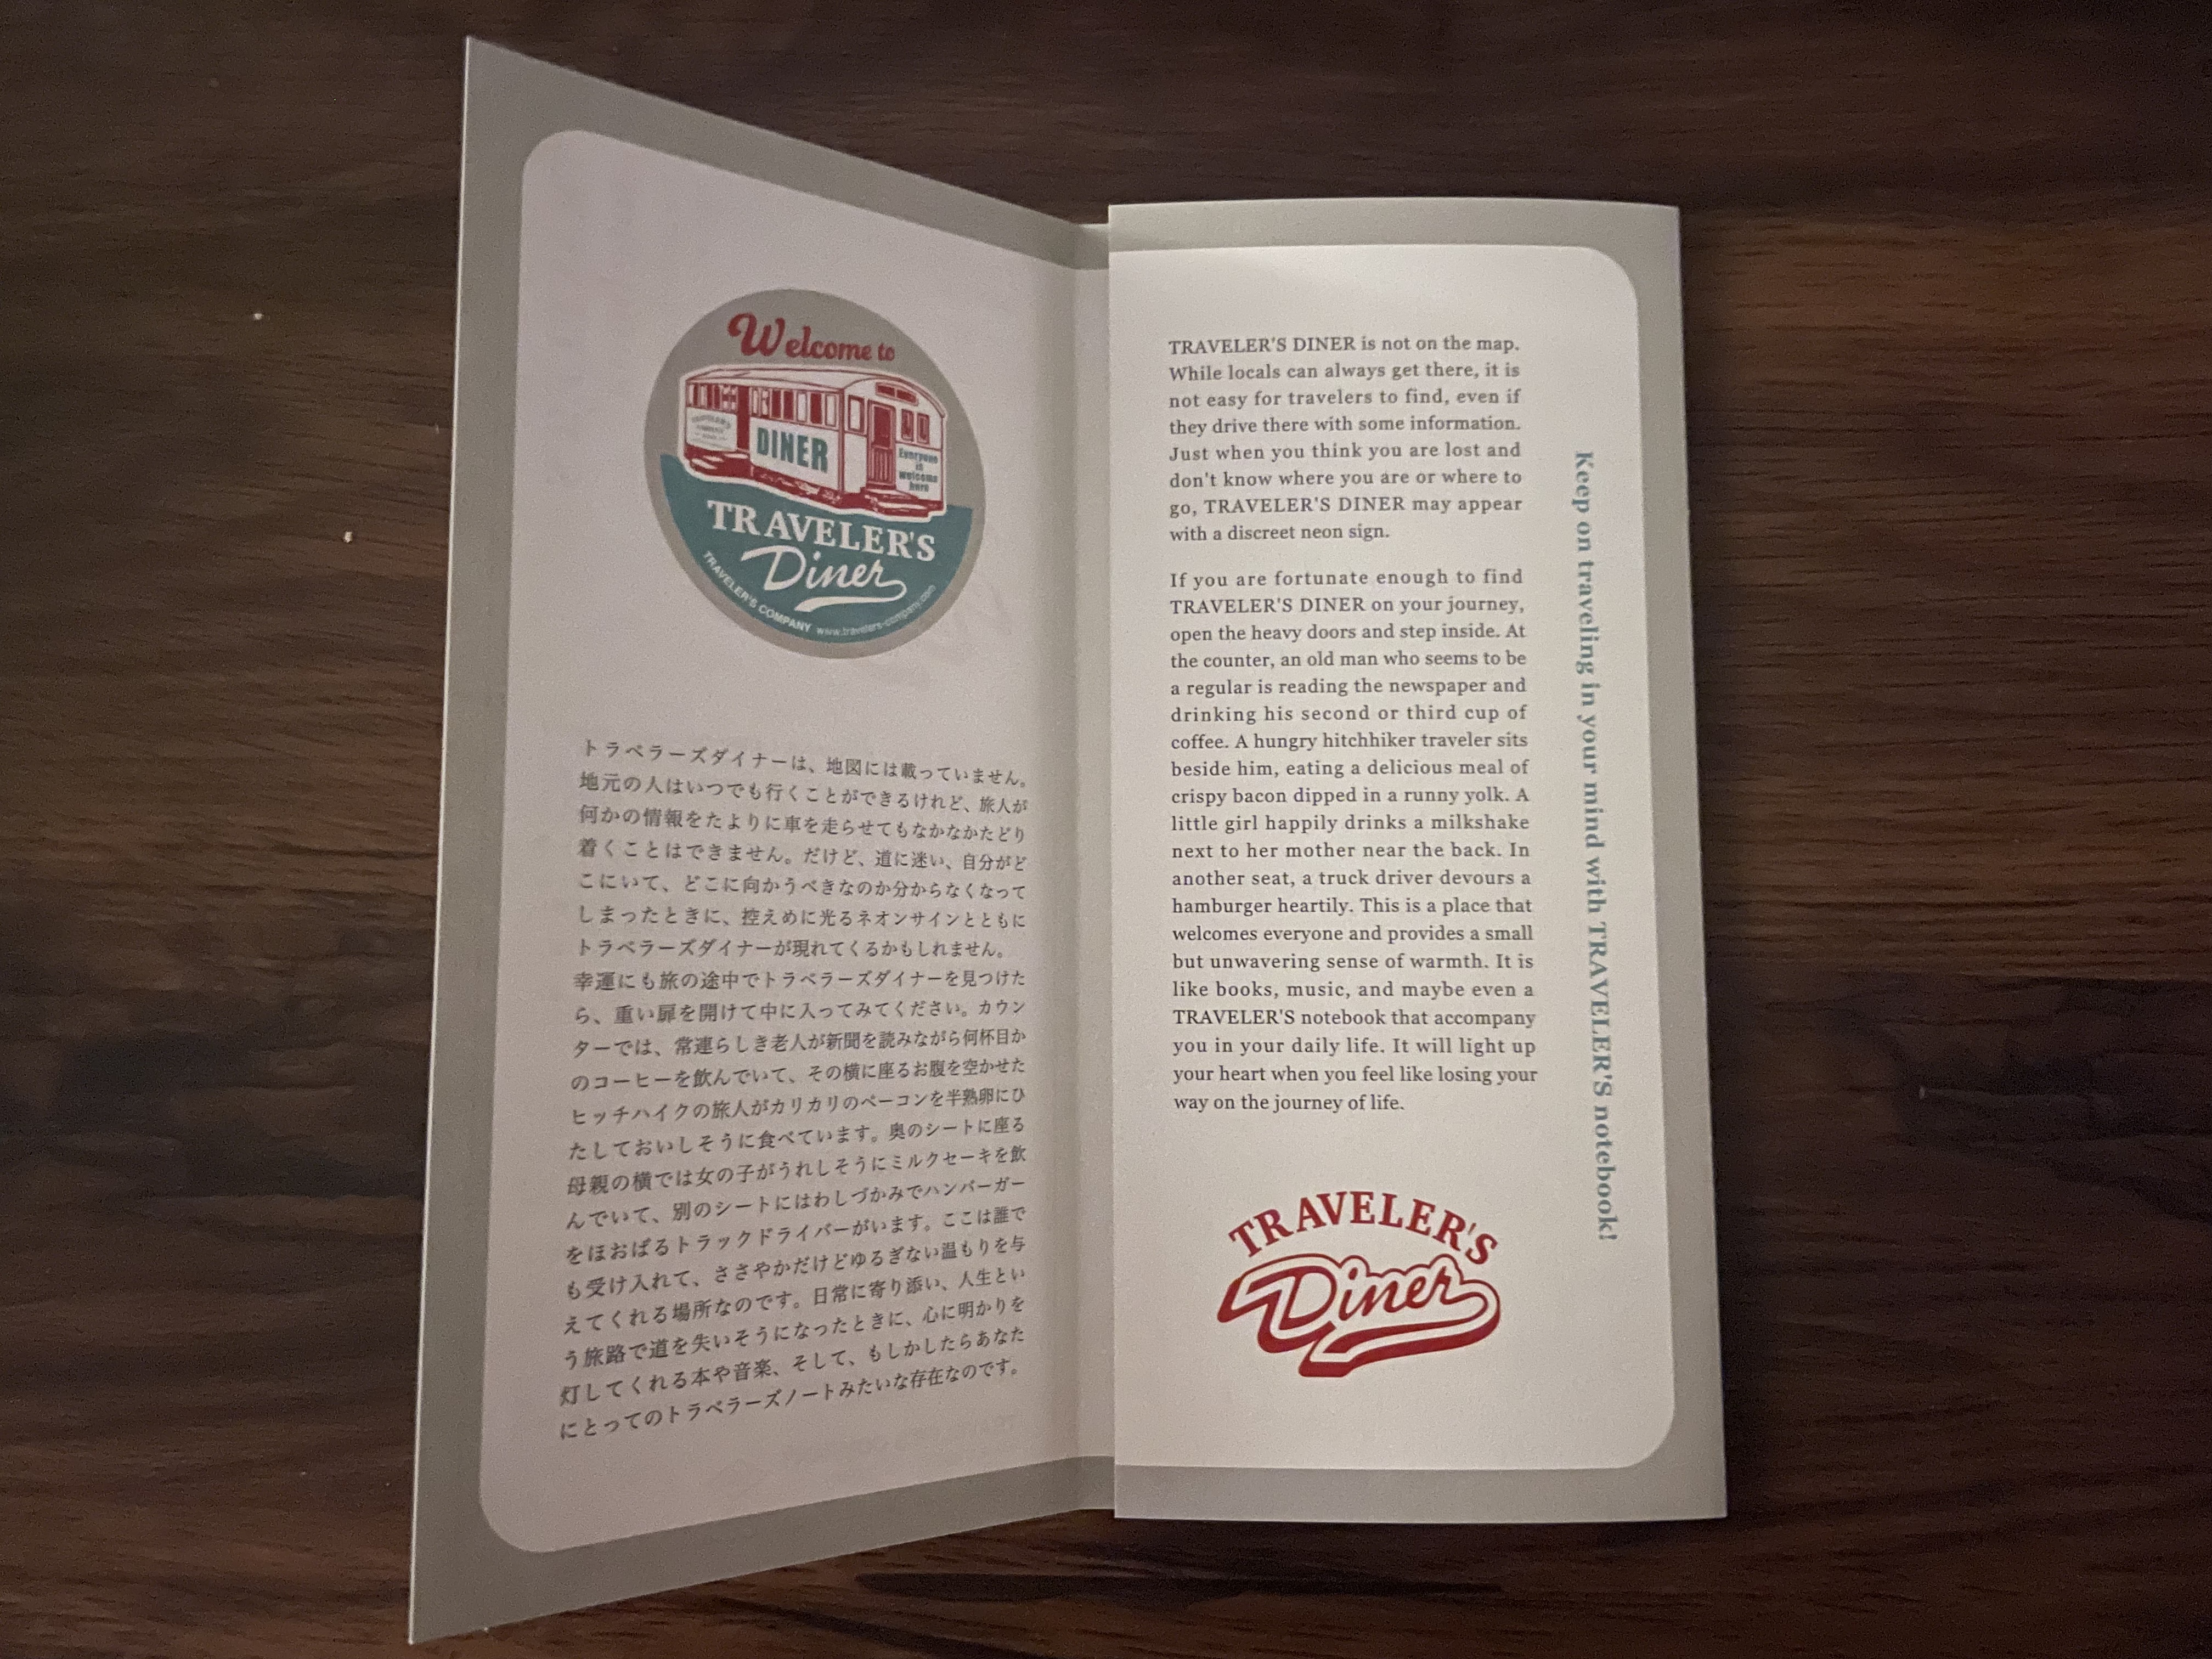 the inside of the pamphlet, which describes the concept of traveler's diner, the theme of this set